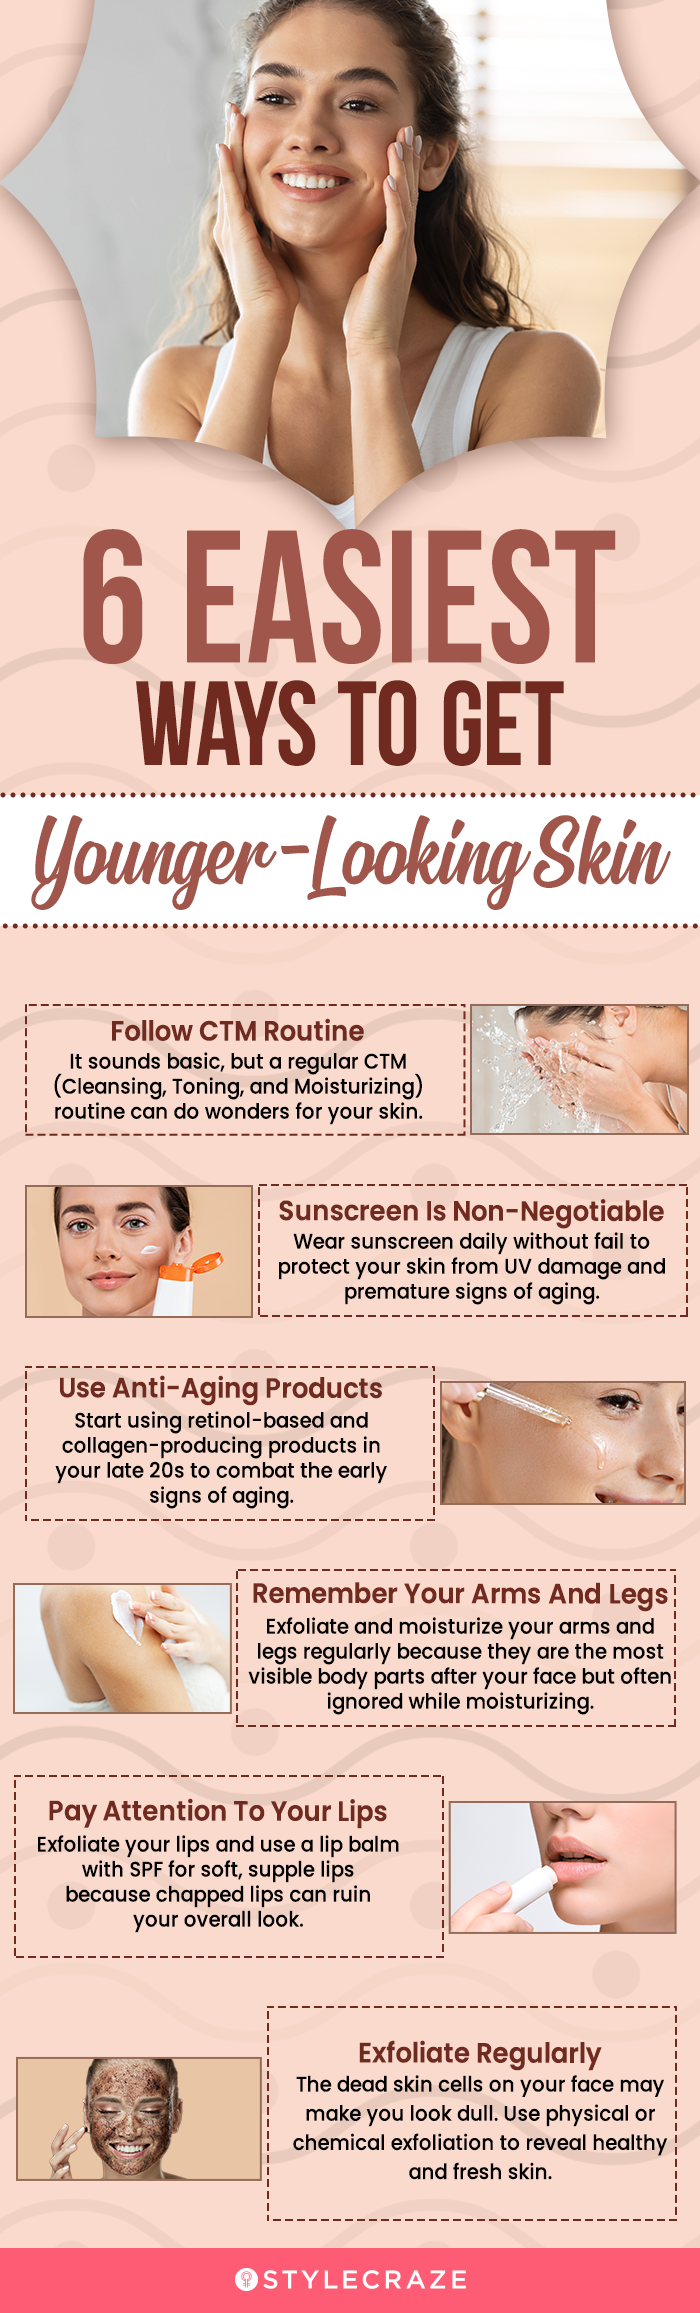 6 easiest ways to younger looking skin (infographic)